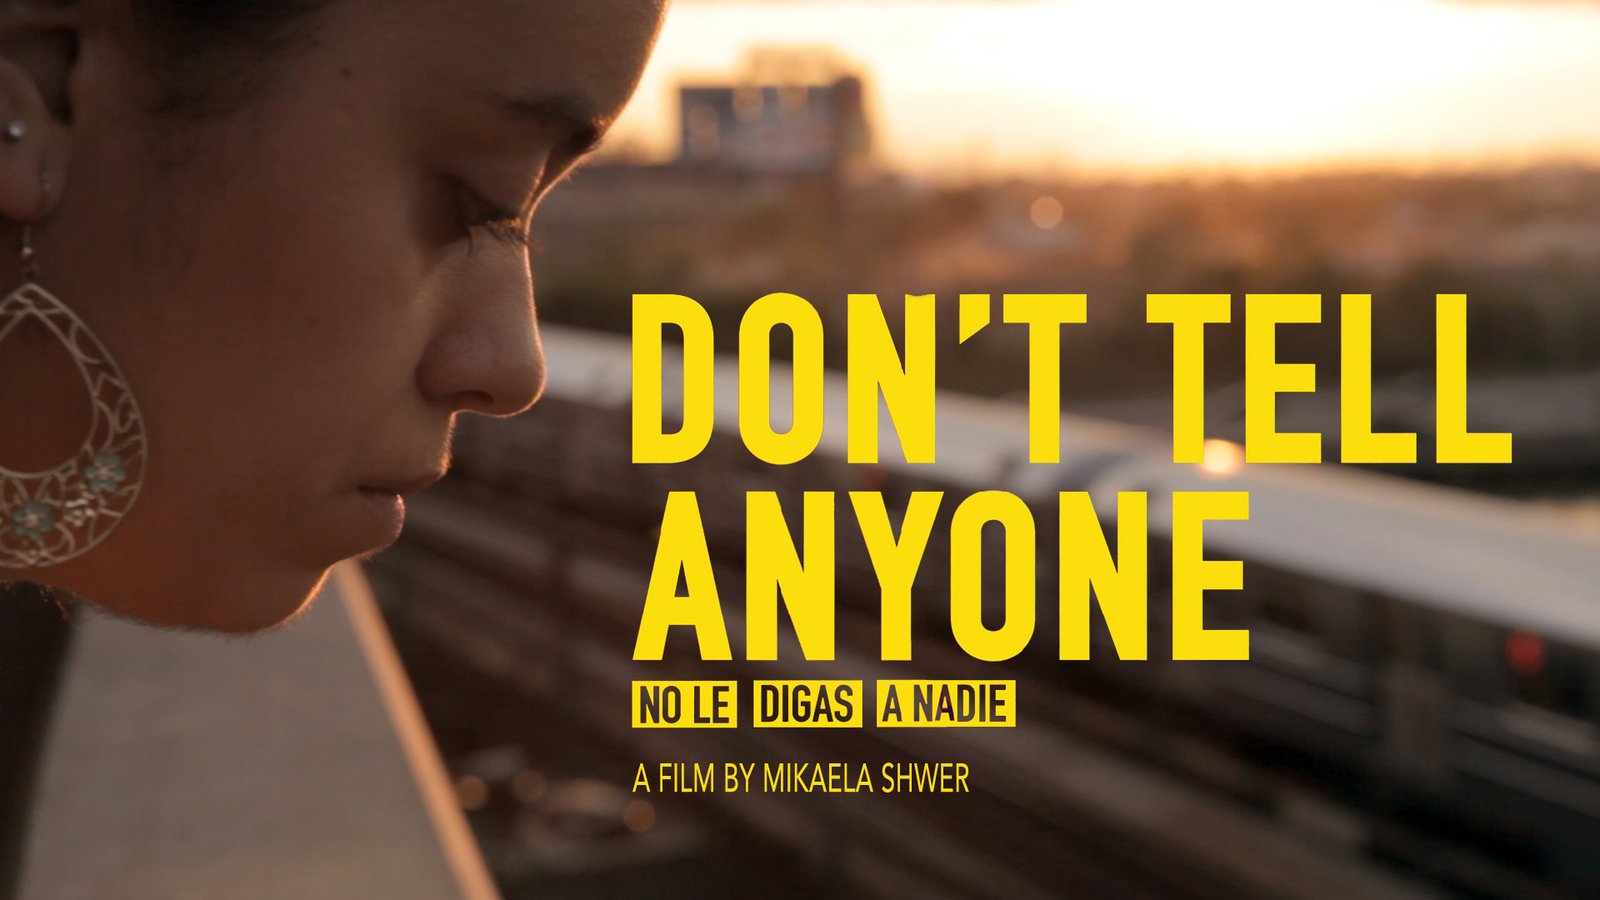 Don't Tell Anyone - No Le Digas a Nadie